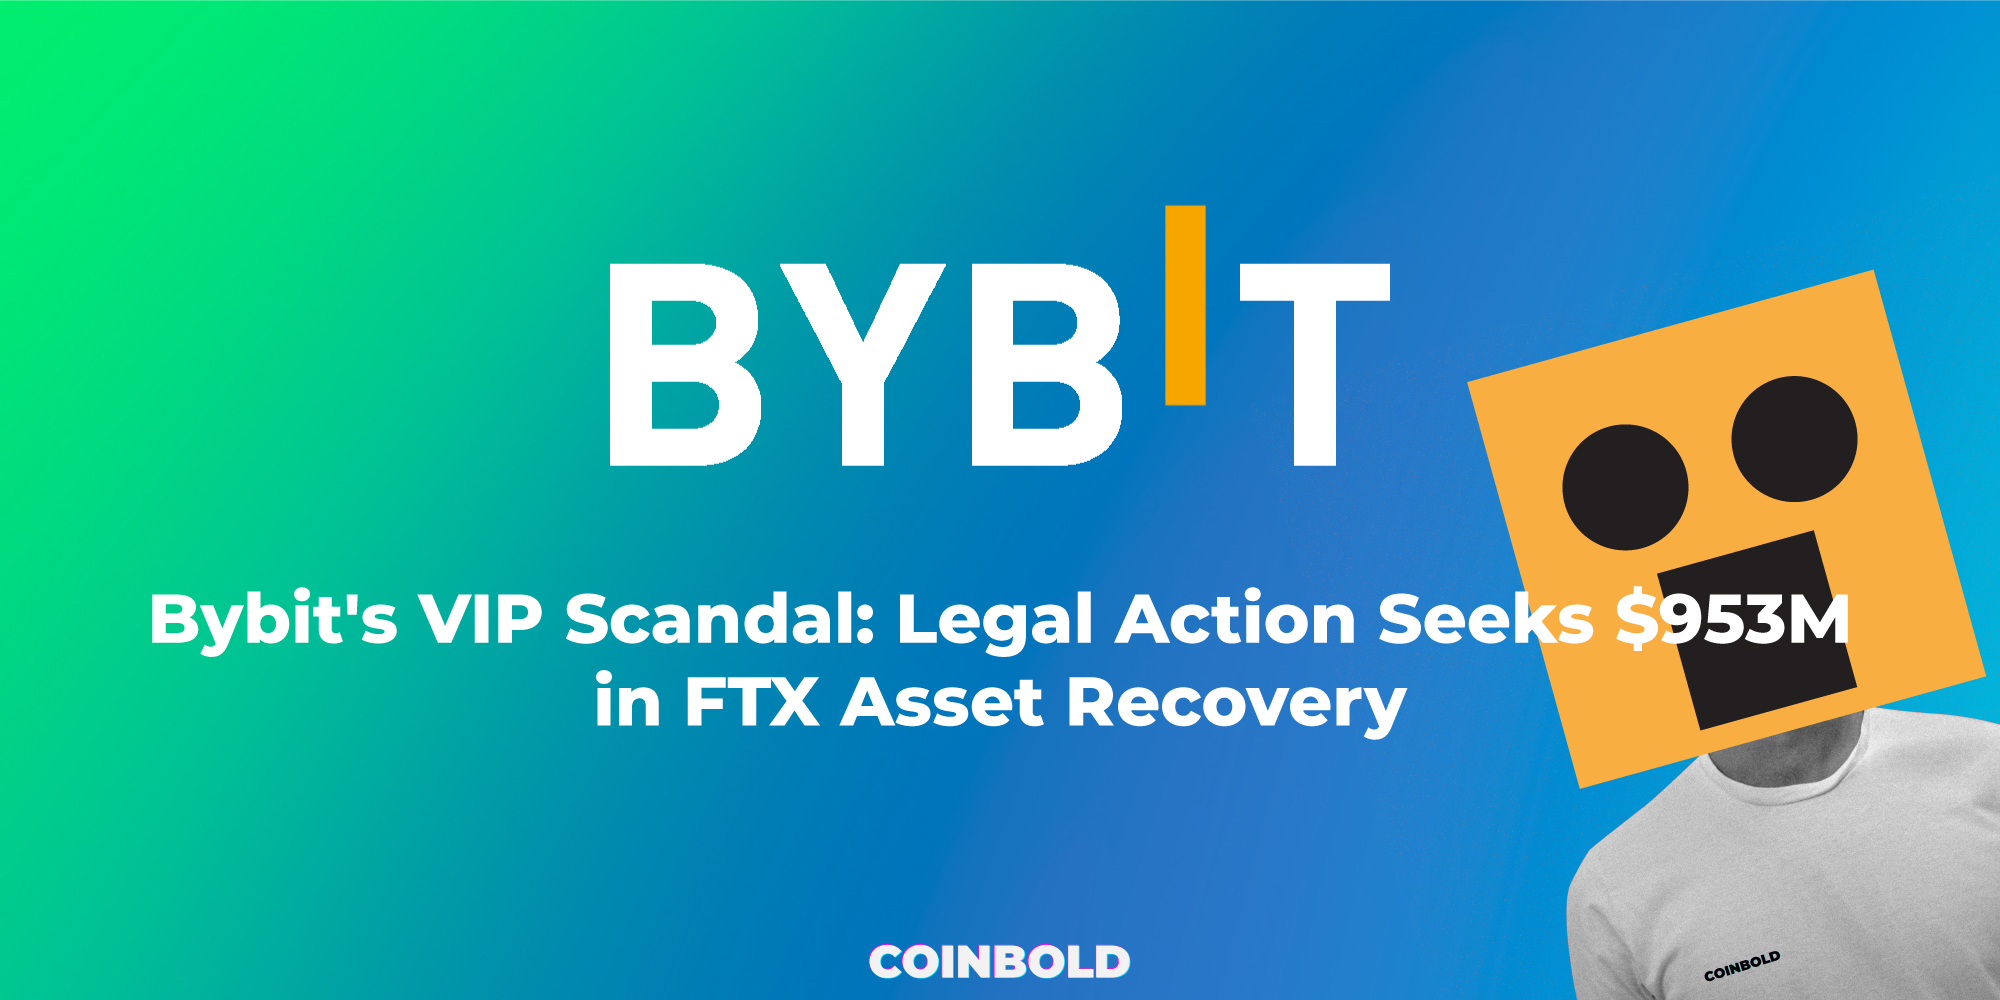 Bybit's VIP Scandal Legal Action Seeks $953M in FTX Asset Recovery